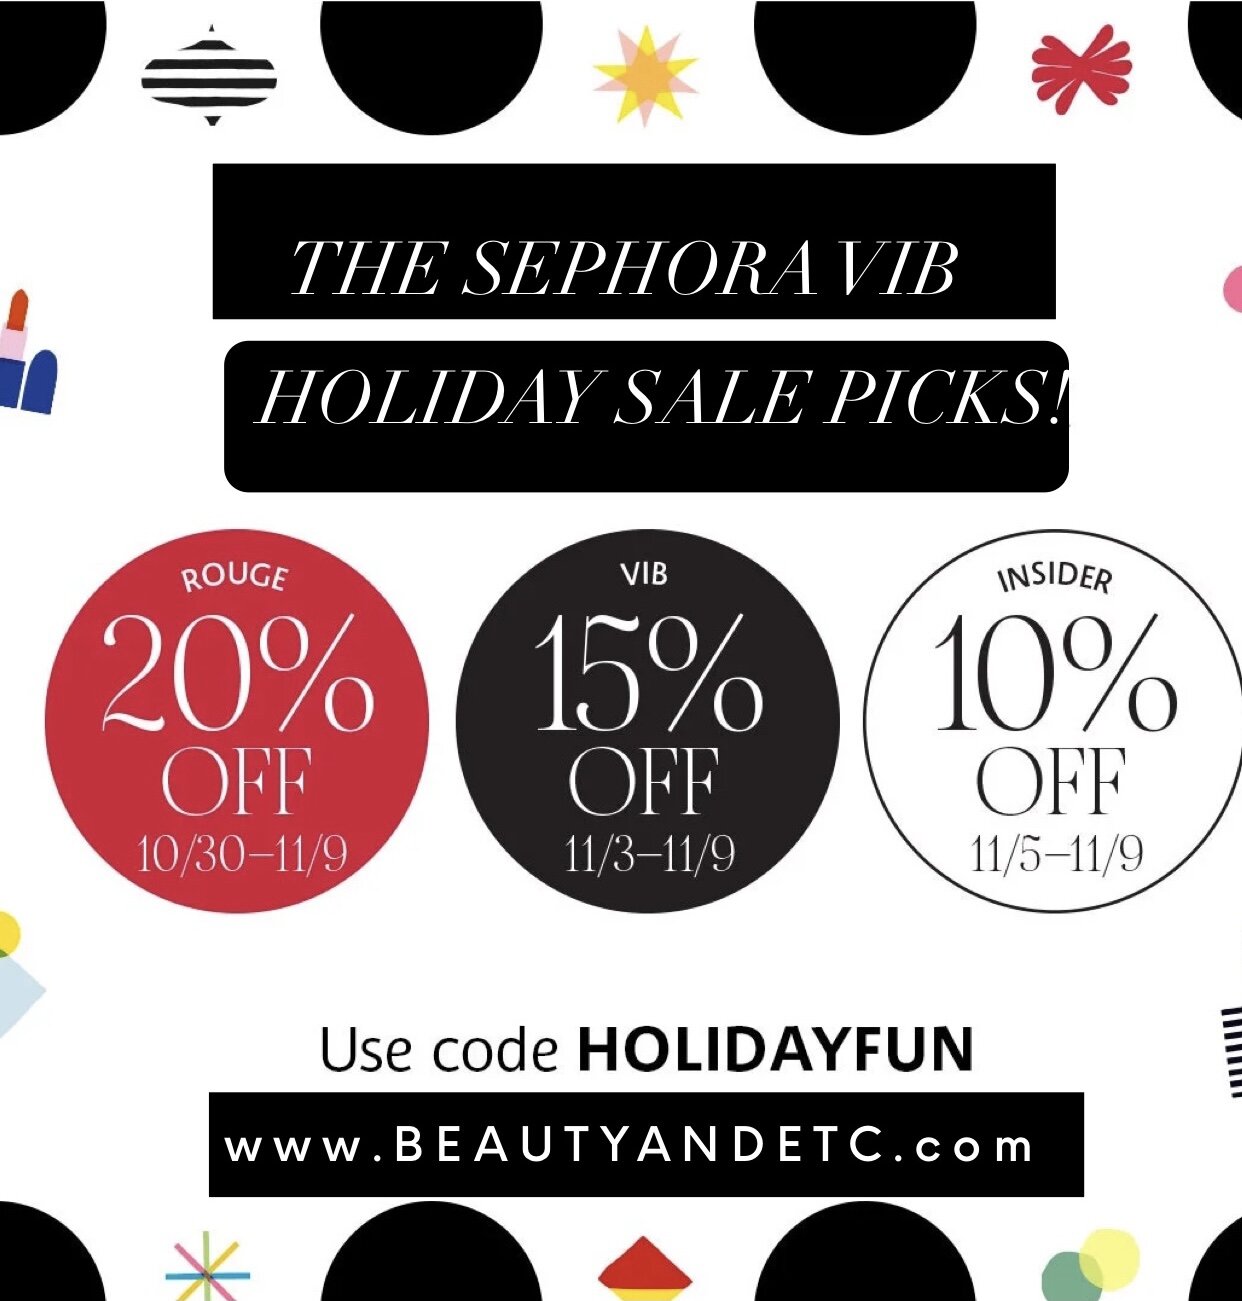 Shopping Guide: The Sephora Rouge Holiday Sale 2020 — Beauty and Etc.